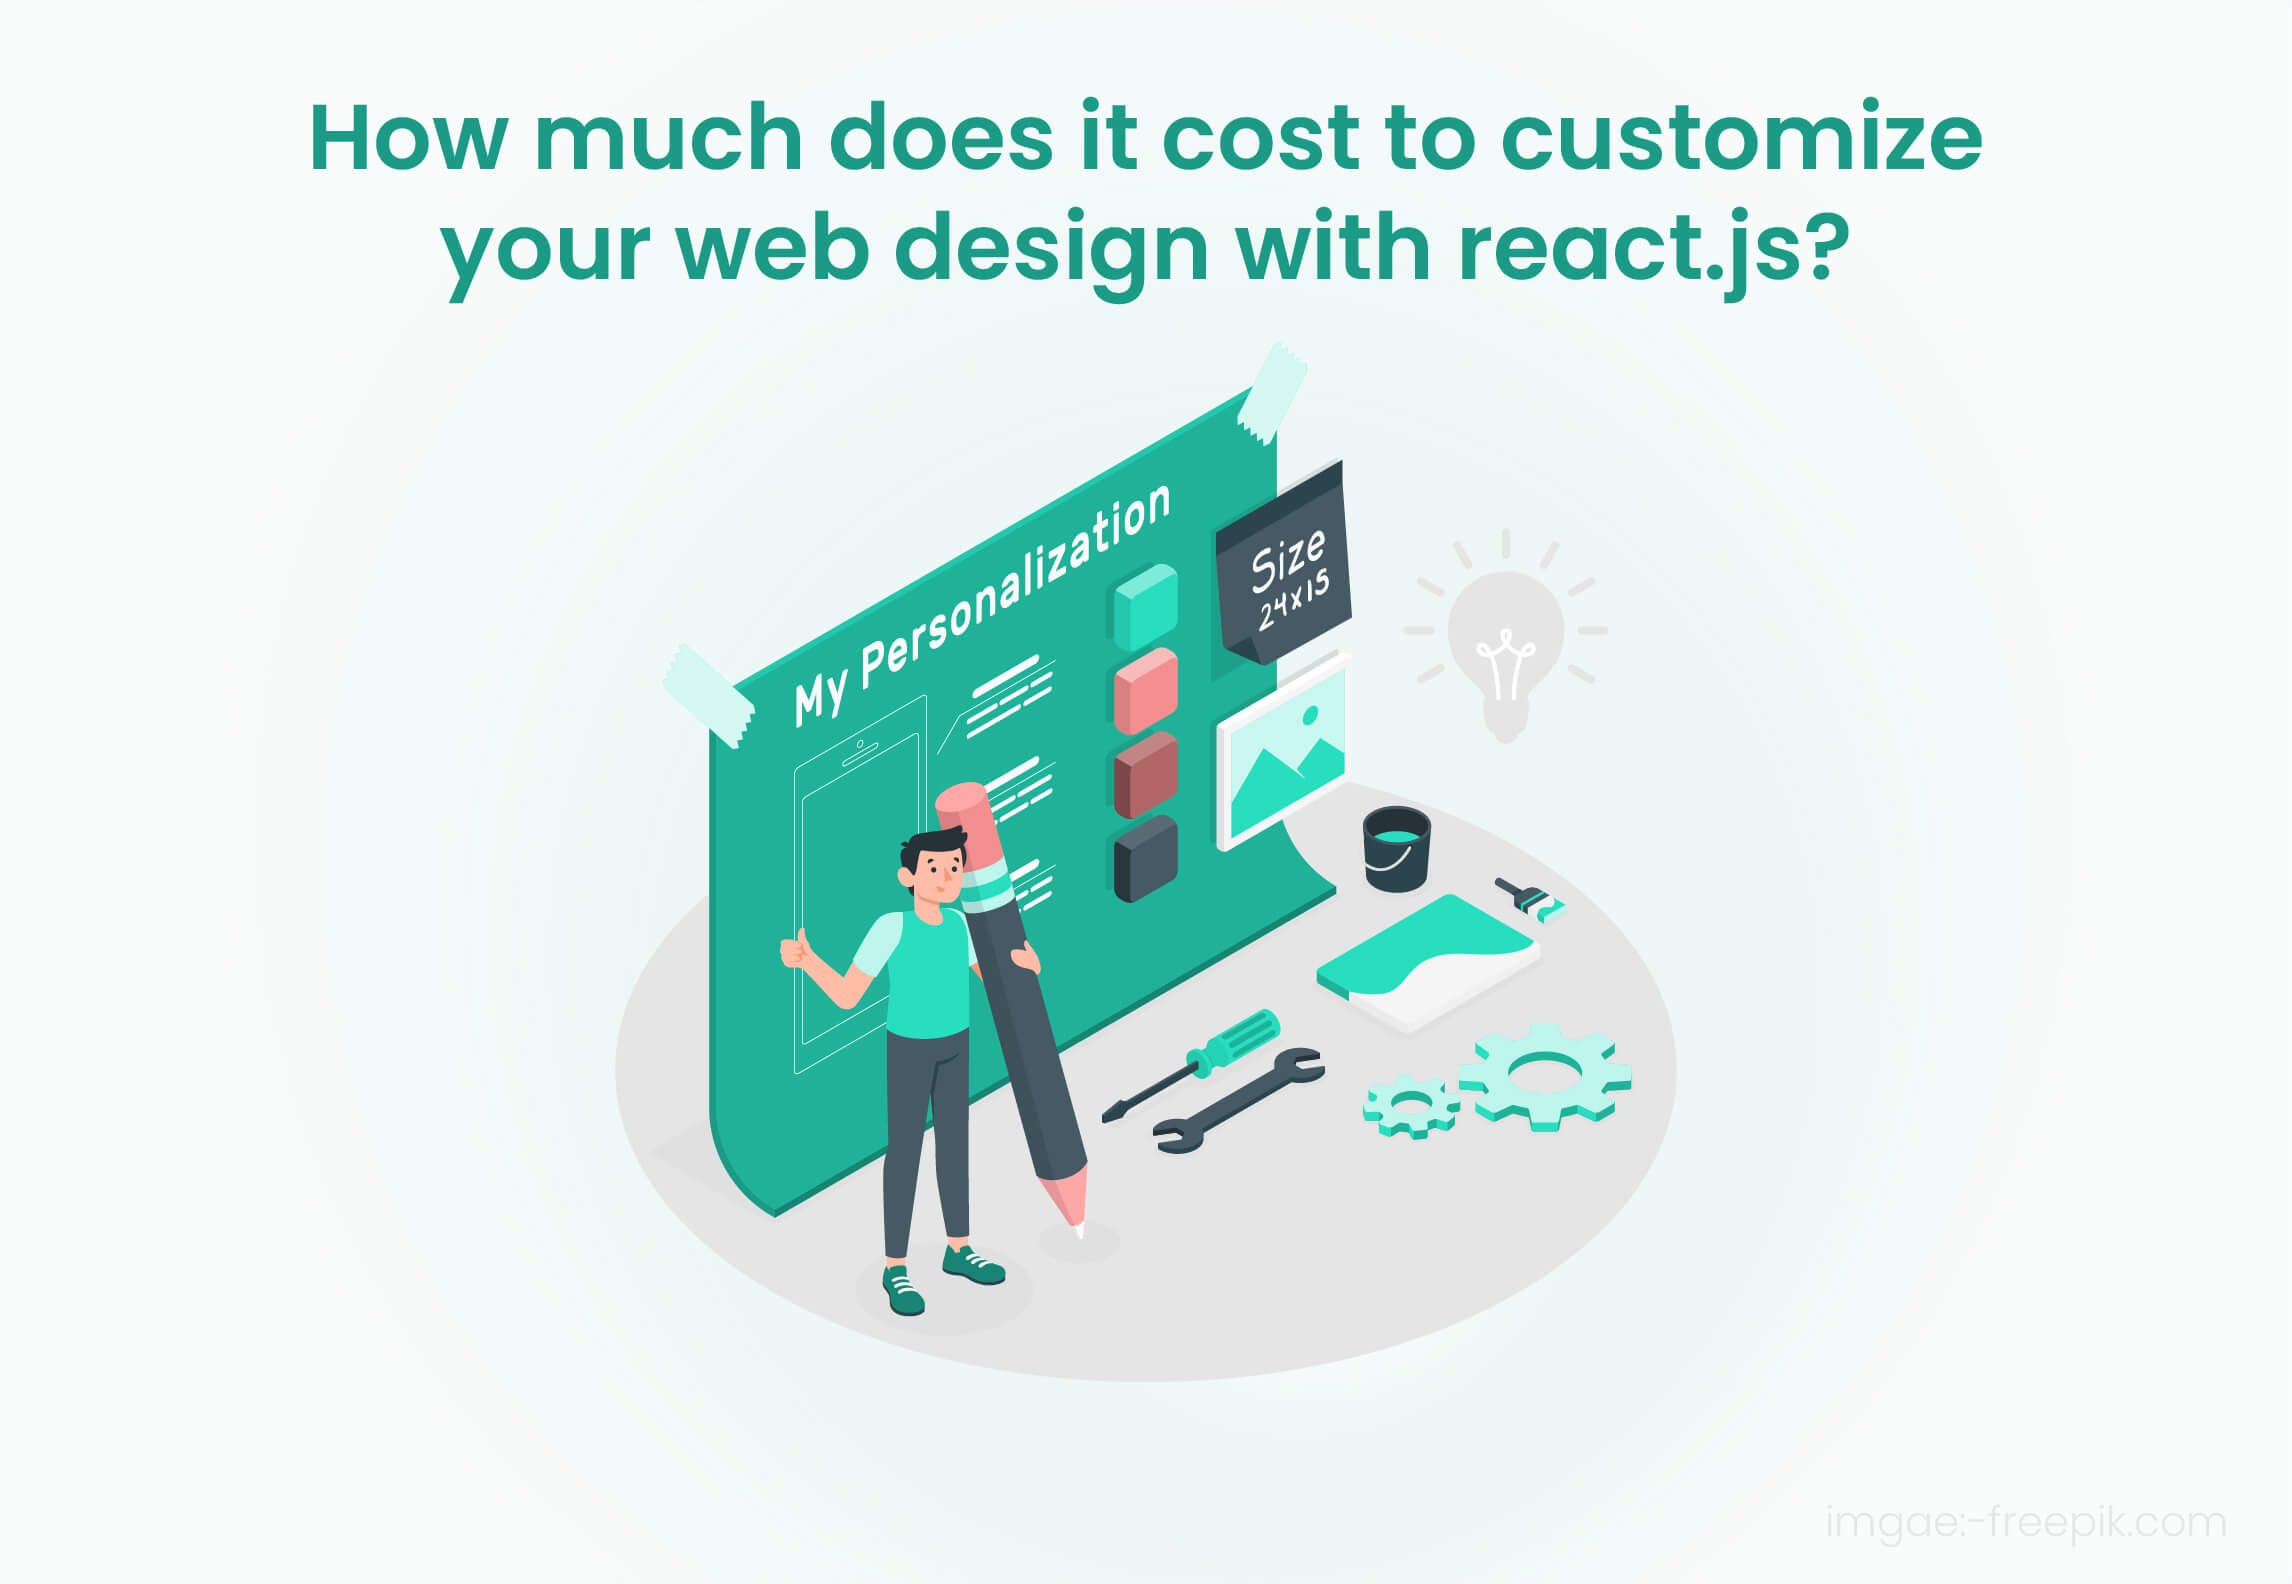 How much does it cost to customize your web design with react.js?